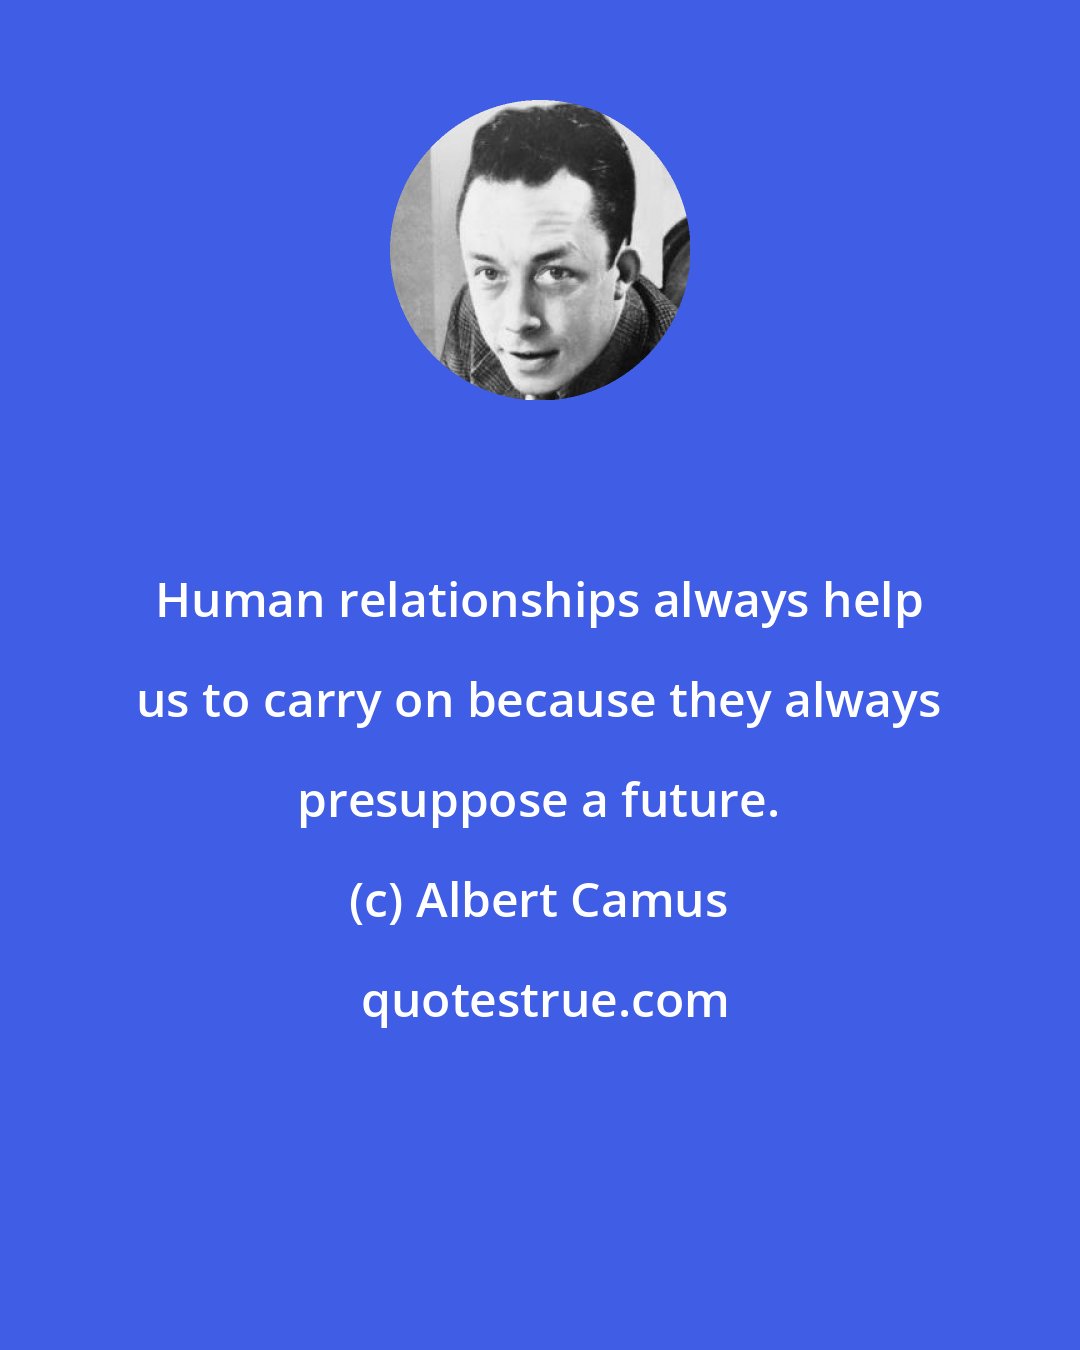 Albert Camus: Human relationships always help us to carry on because they always presuppose a future.